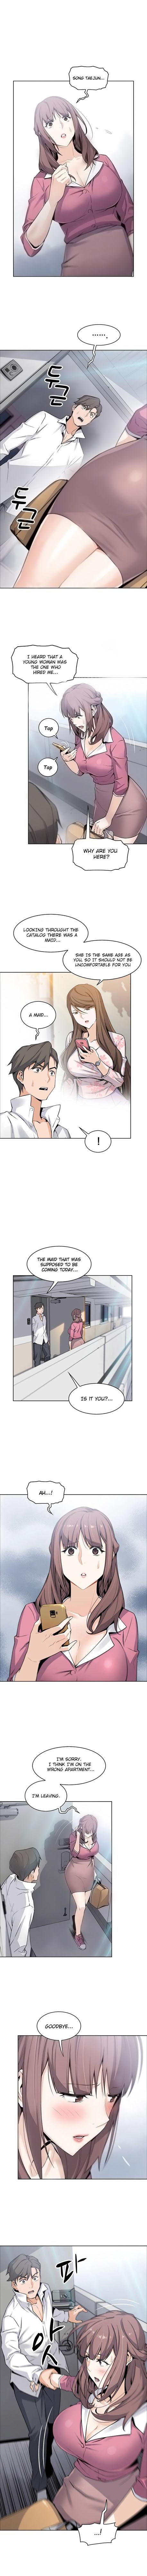 Housekeeper [Neck Pillow, Paper] Ch.49/49 [English] [Manhwa PDF] Completed 84